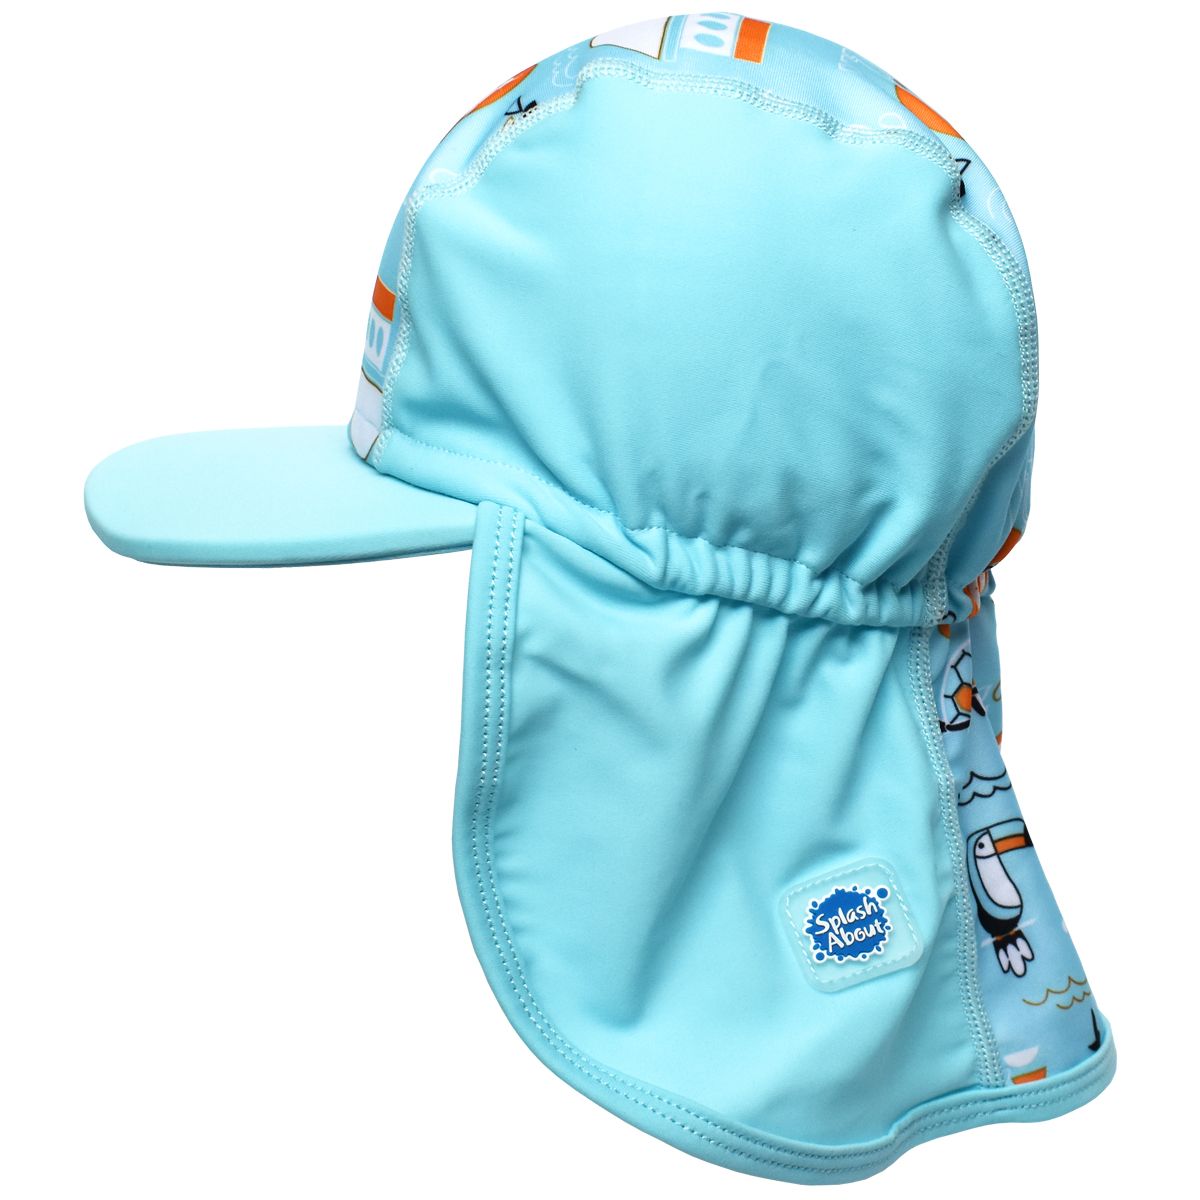 Legionnaire style sun hat in light blue, with Noah's Ark themed print panel including lions, turtles, birds and more. Side.